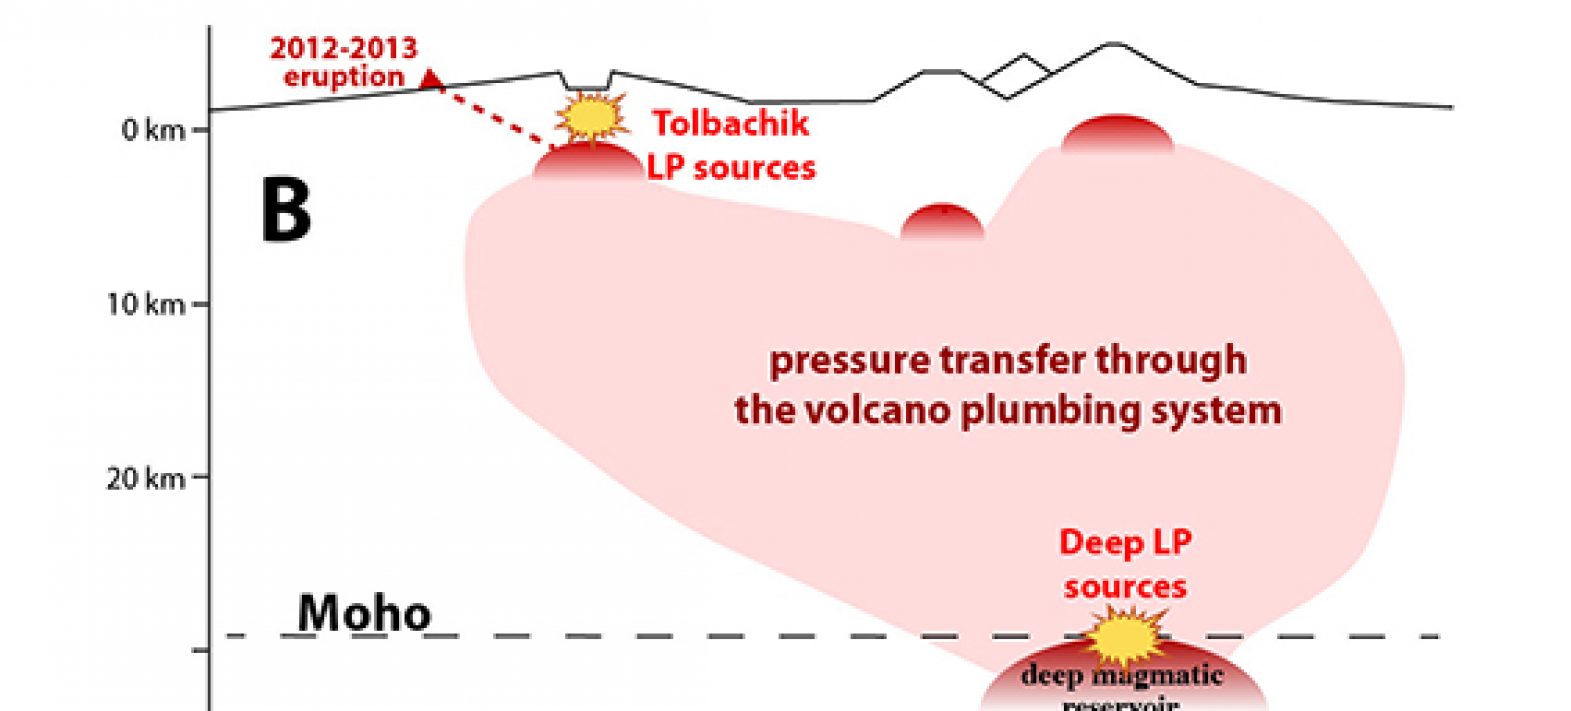 Deep “long-period” earthquakes: early indications of volcano activation